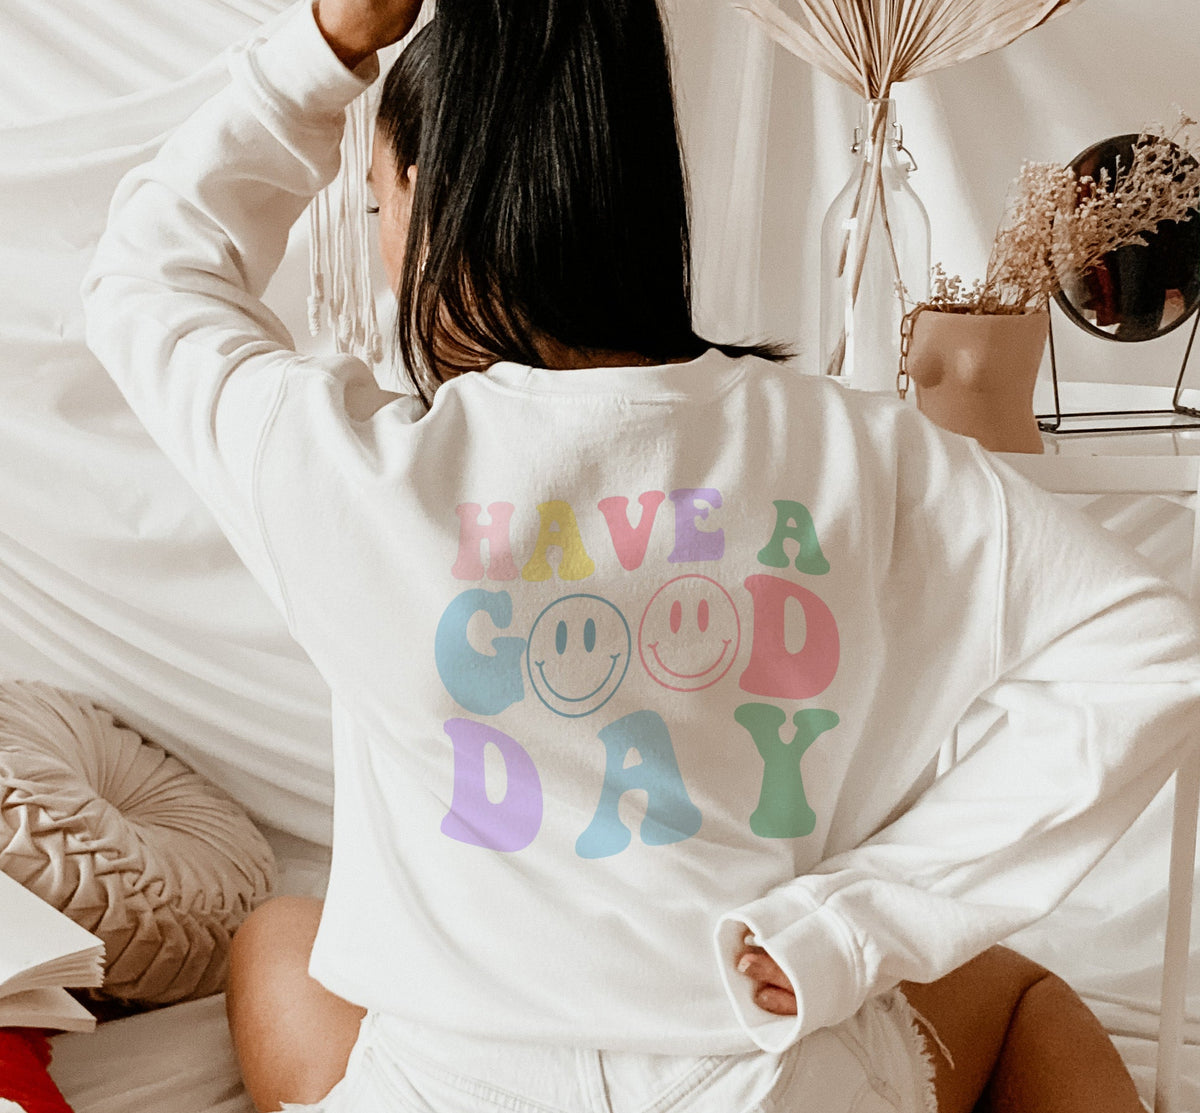 white sweater that says have a good day - HighCiti